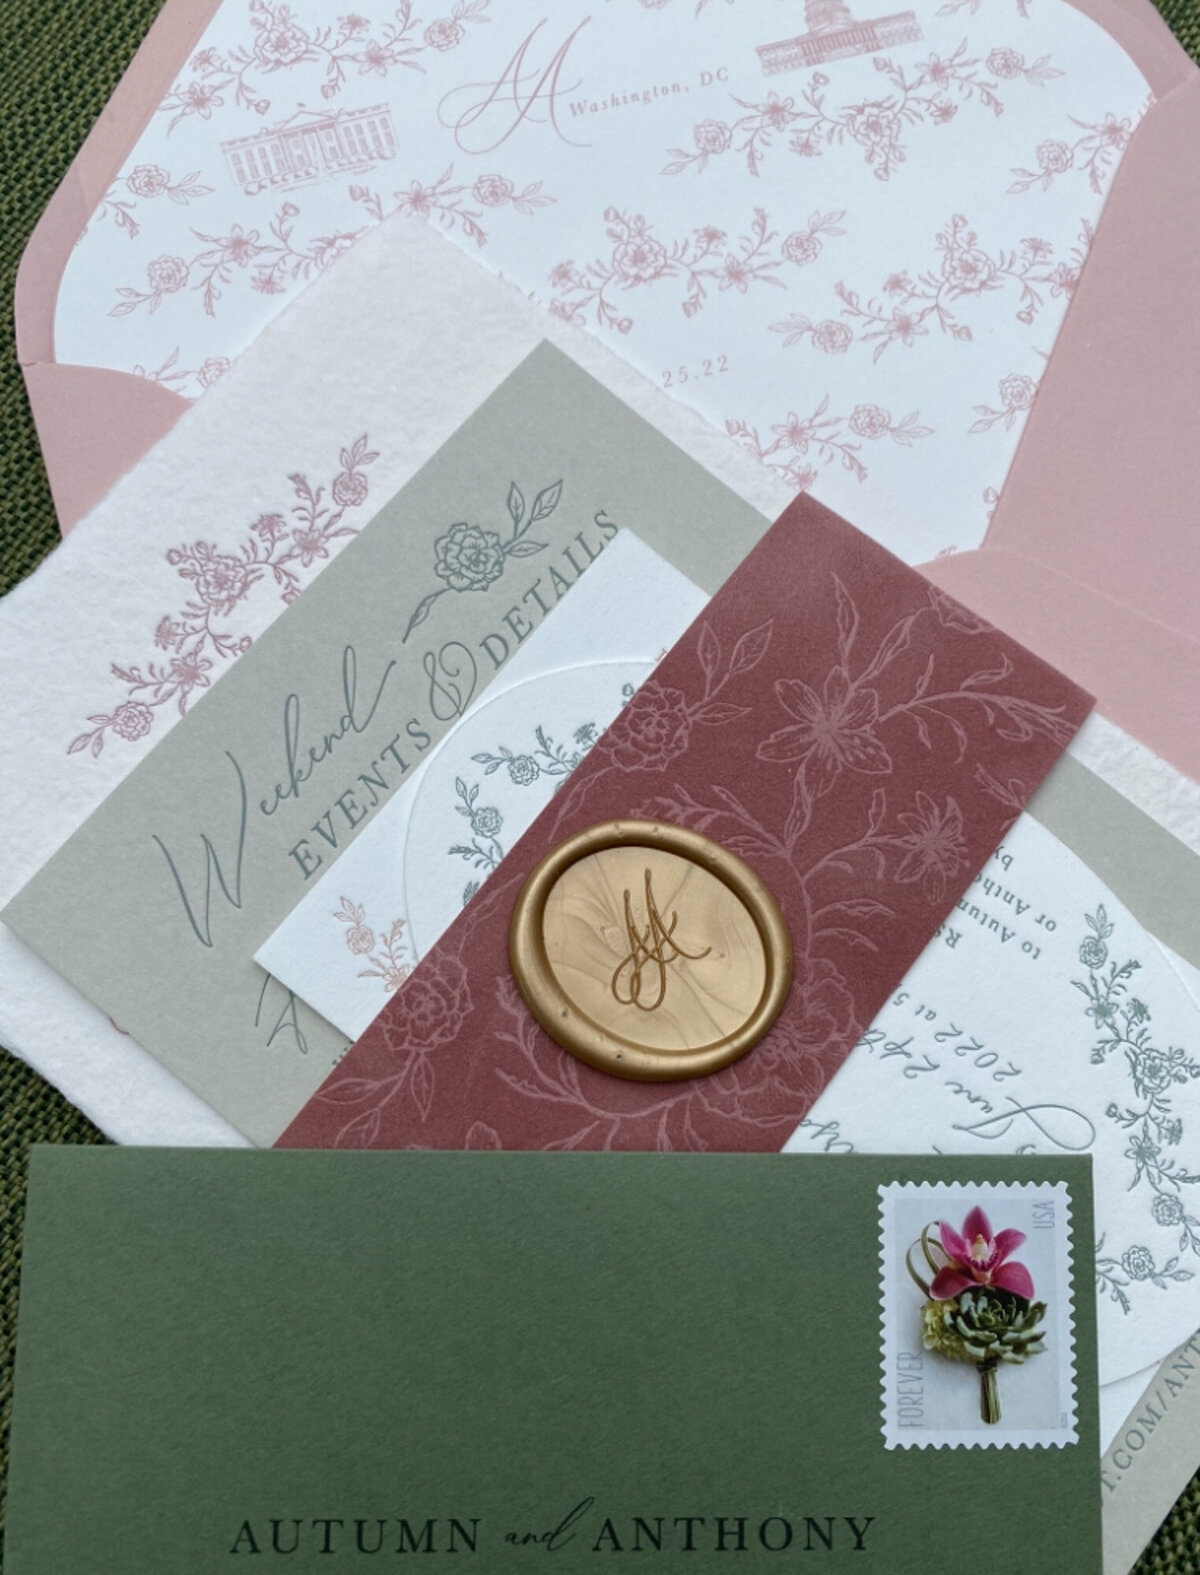 Wedding envelope and invitation with custom calligraphy and seal wax